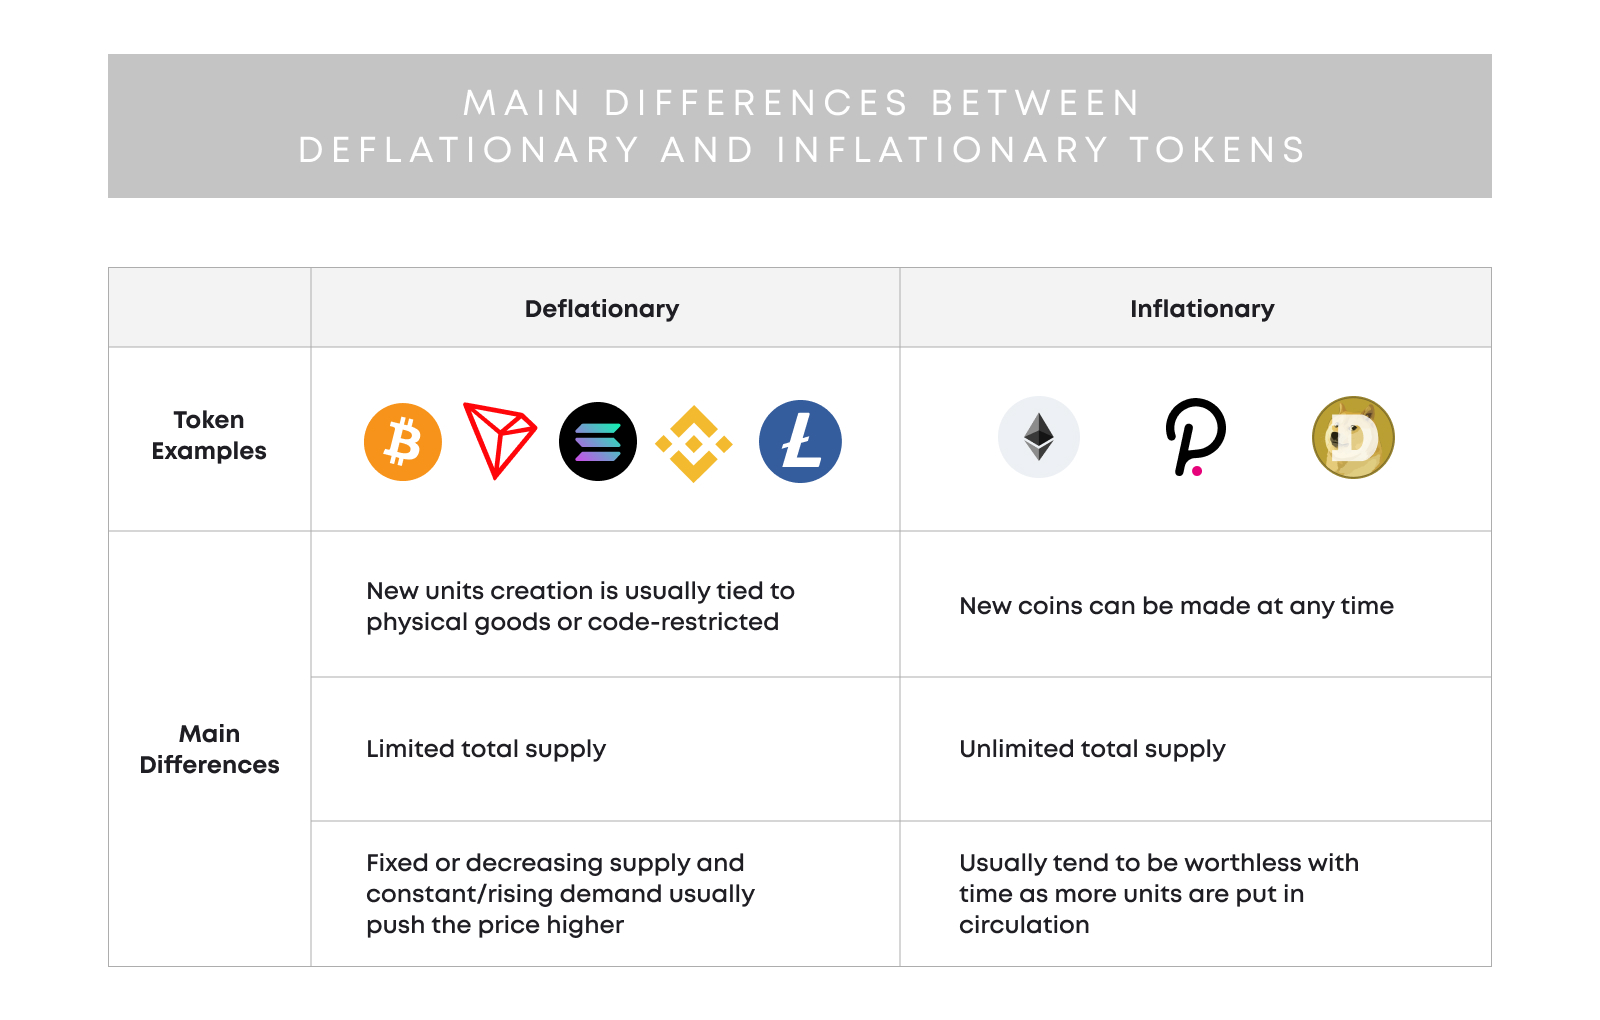 Deflationary and Inflationary tokens with examples